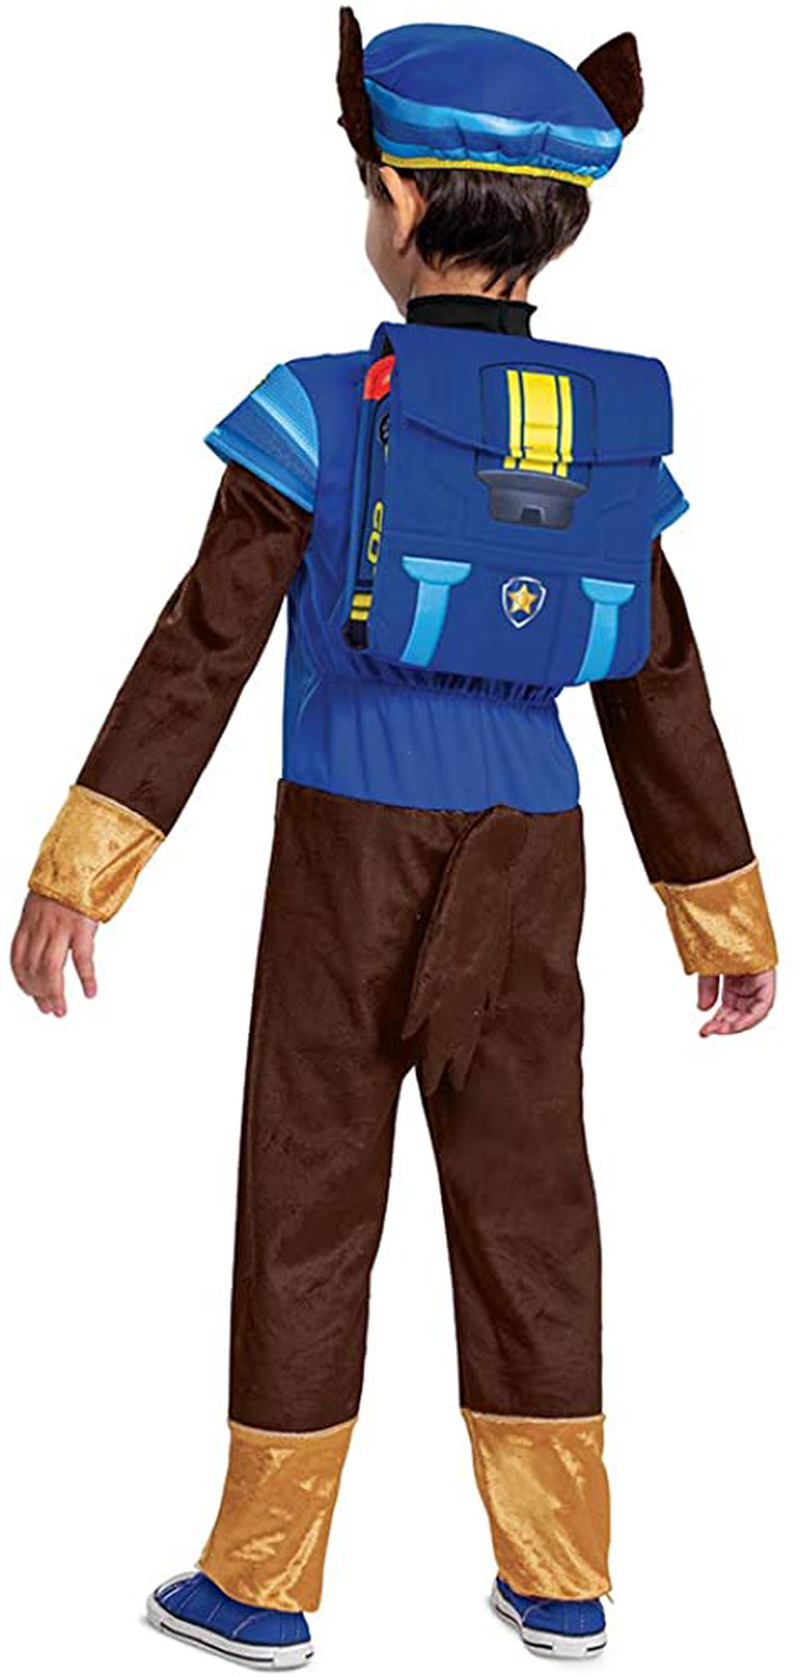 Paw Patrol Movie Chase Deluxe Toddler/Kid's Costume